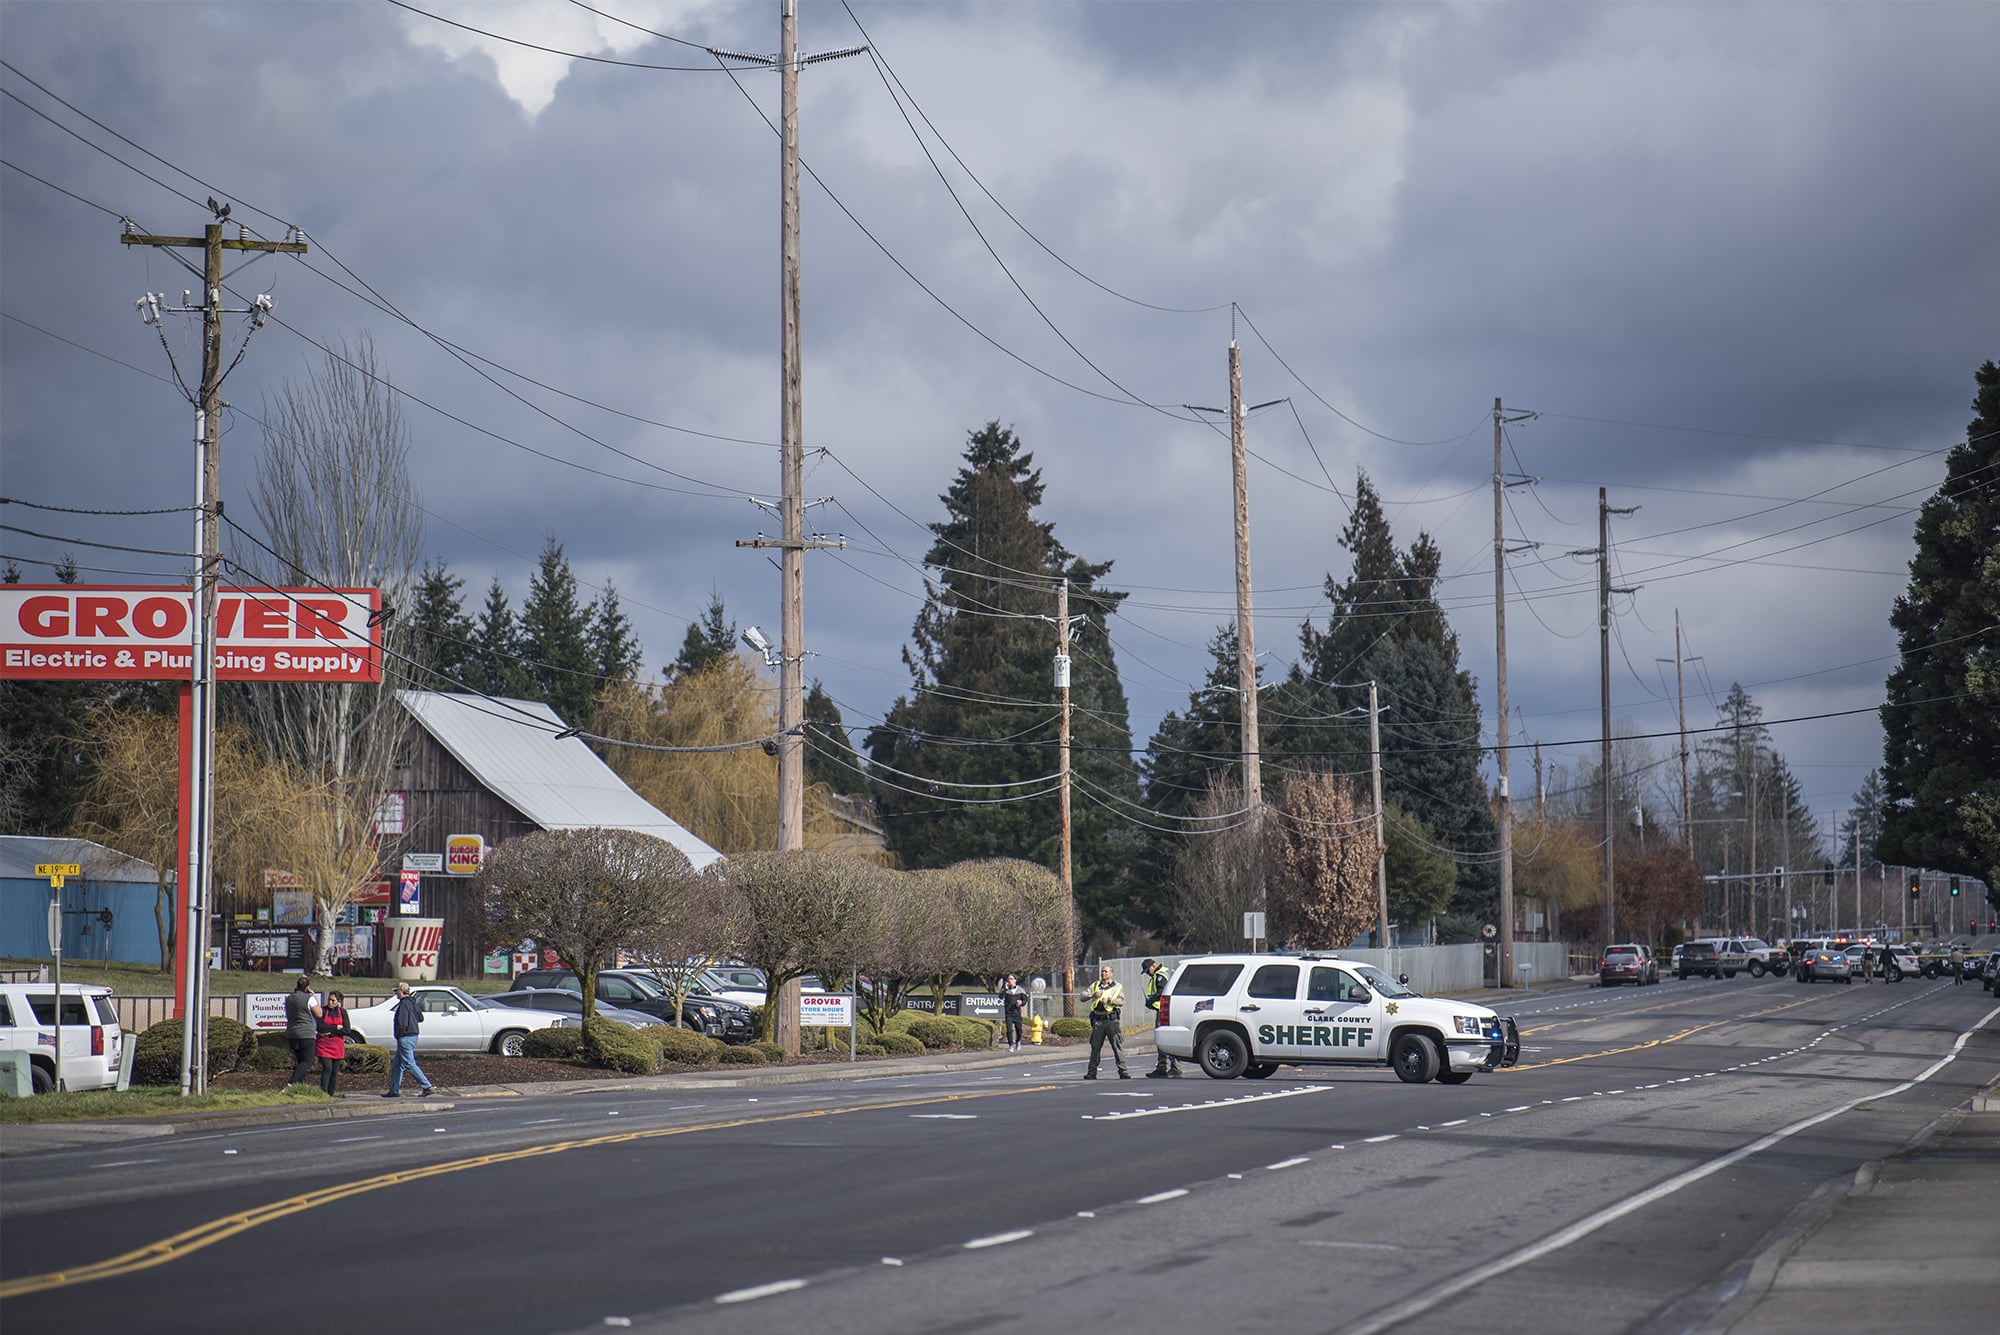 A Clark County Sheriff's cruiser blocks the road leading to the scene of a police shooting in Hazel Dell on Thursday, March 7, 2019.